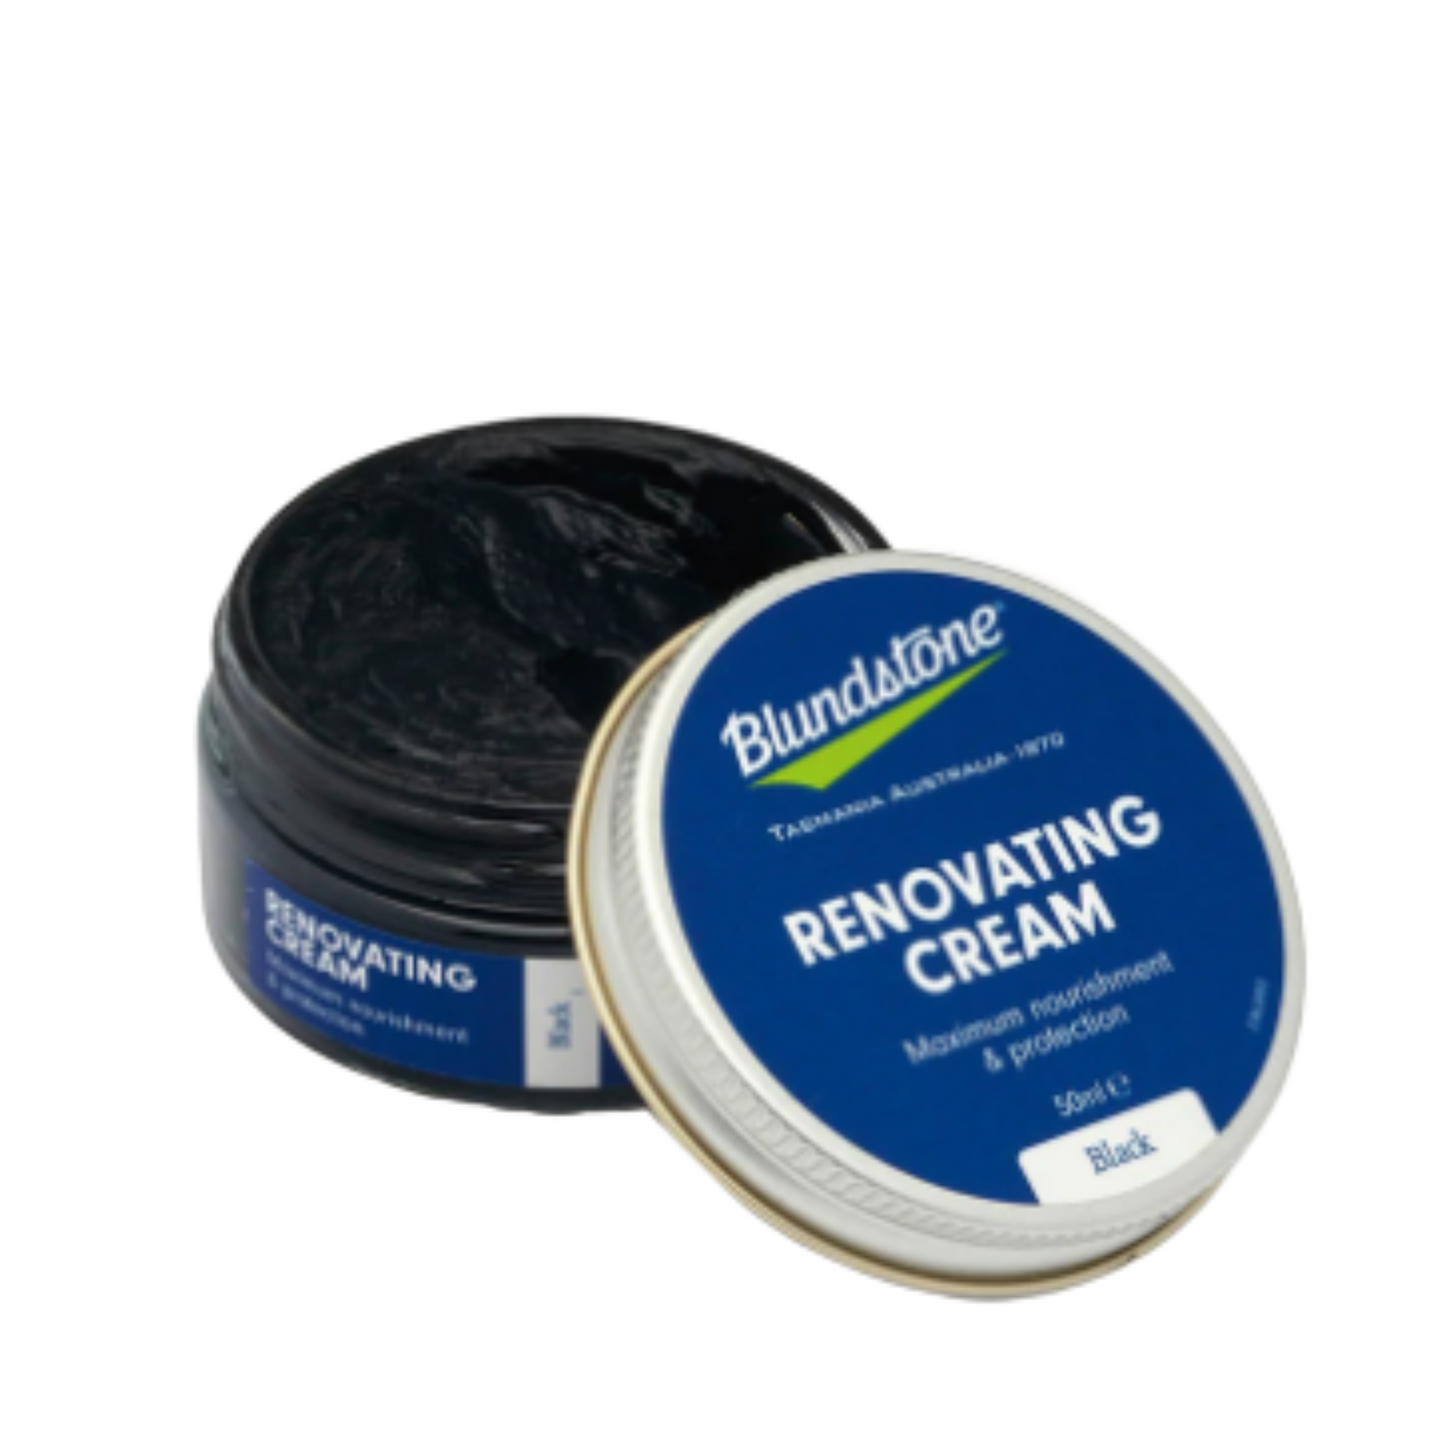 Open container of black renovating cream. Lid is leaning on the open jar.